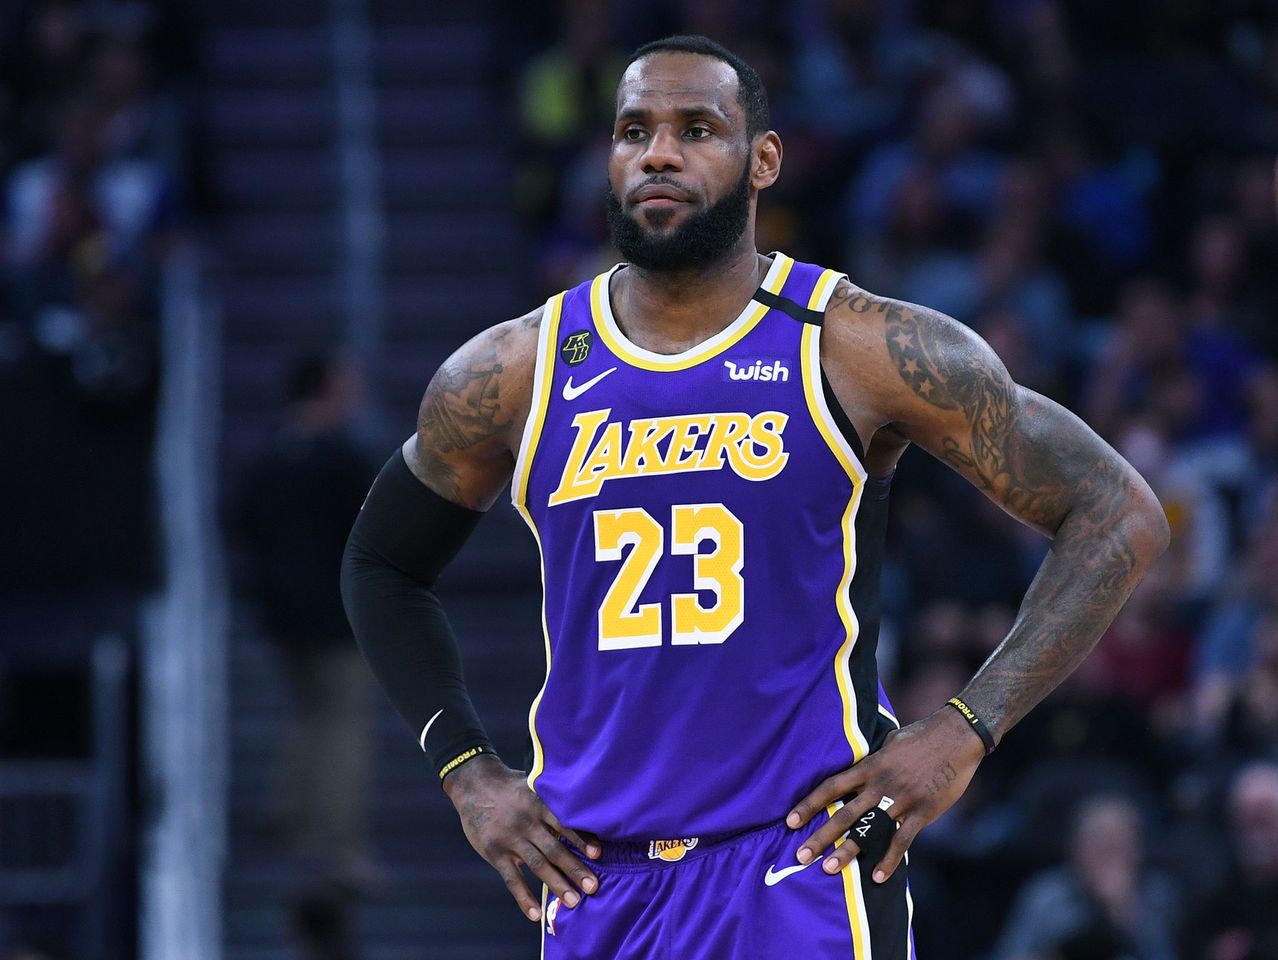 LeBron James #23 of the Los Angeles Lakers looks on against the Golden State Warriors during an NBA basketball game at Chase Center on February 08, 2020  | Photo: Getty Images